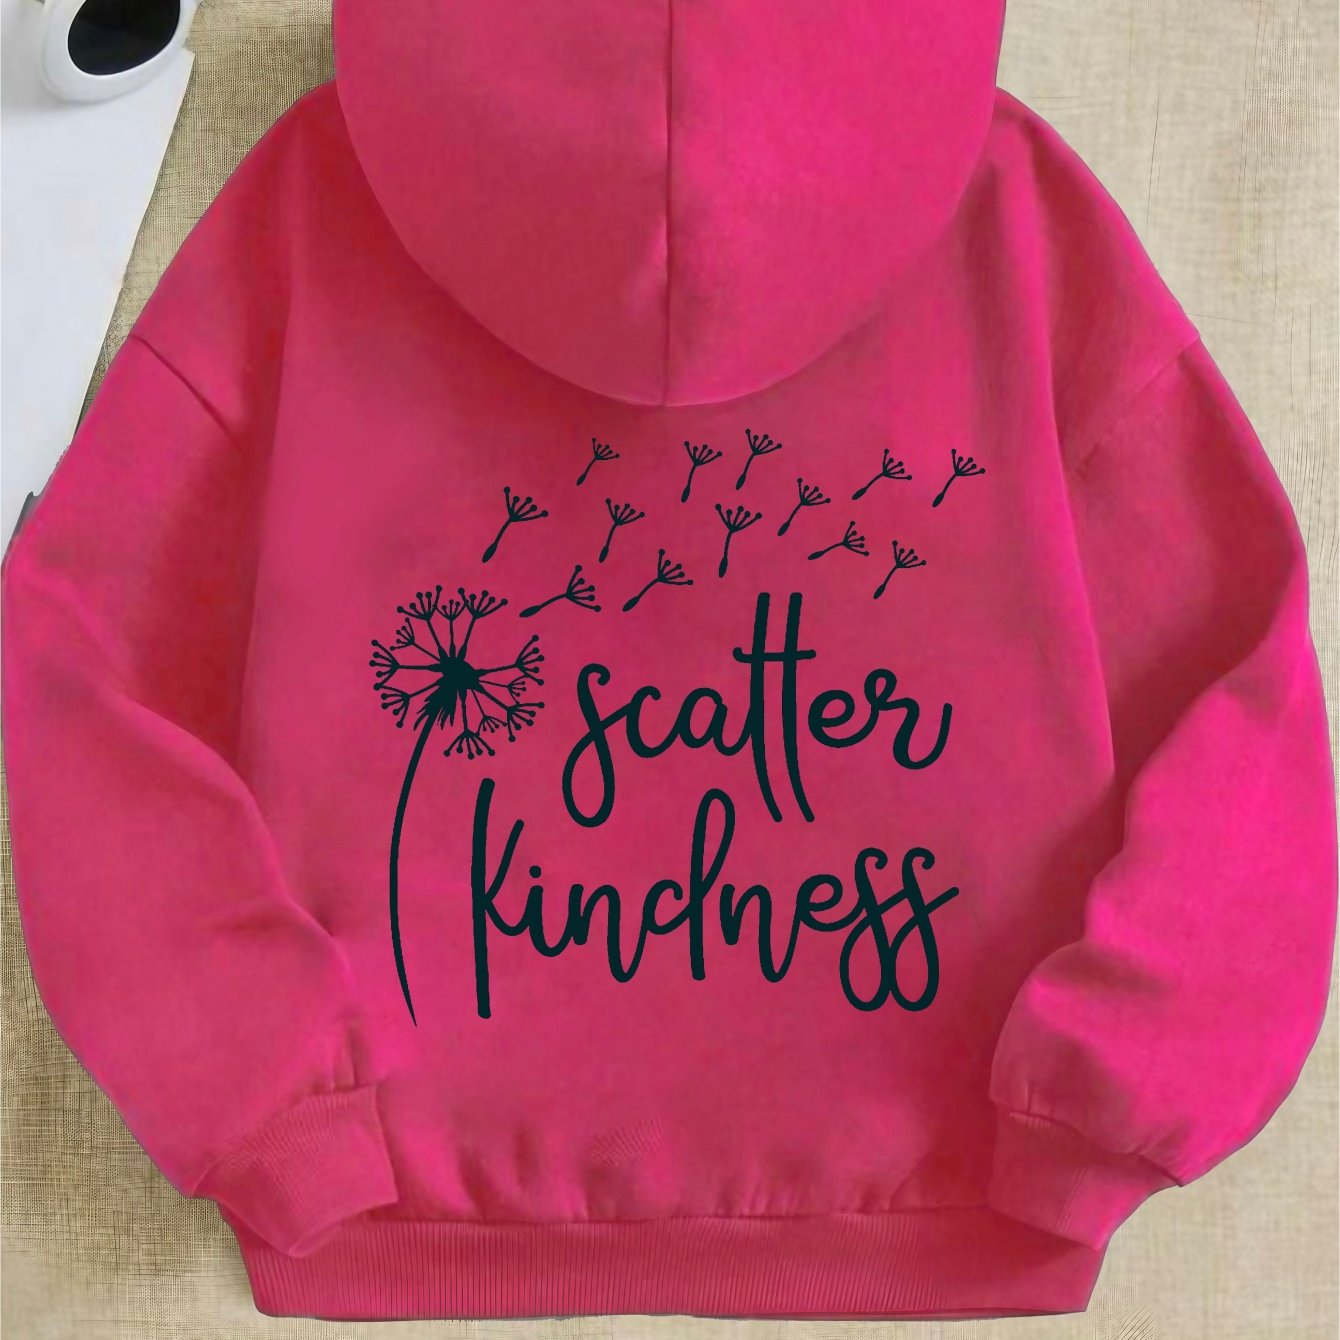 Scatter Kindness Youth Christian Pullover Hooded Sweatshirt claimedbygoddesigns